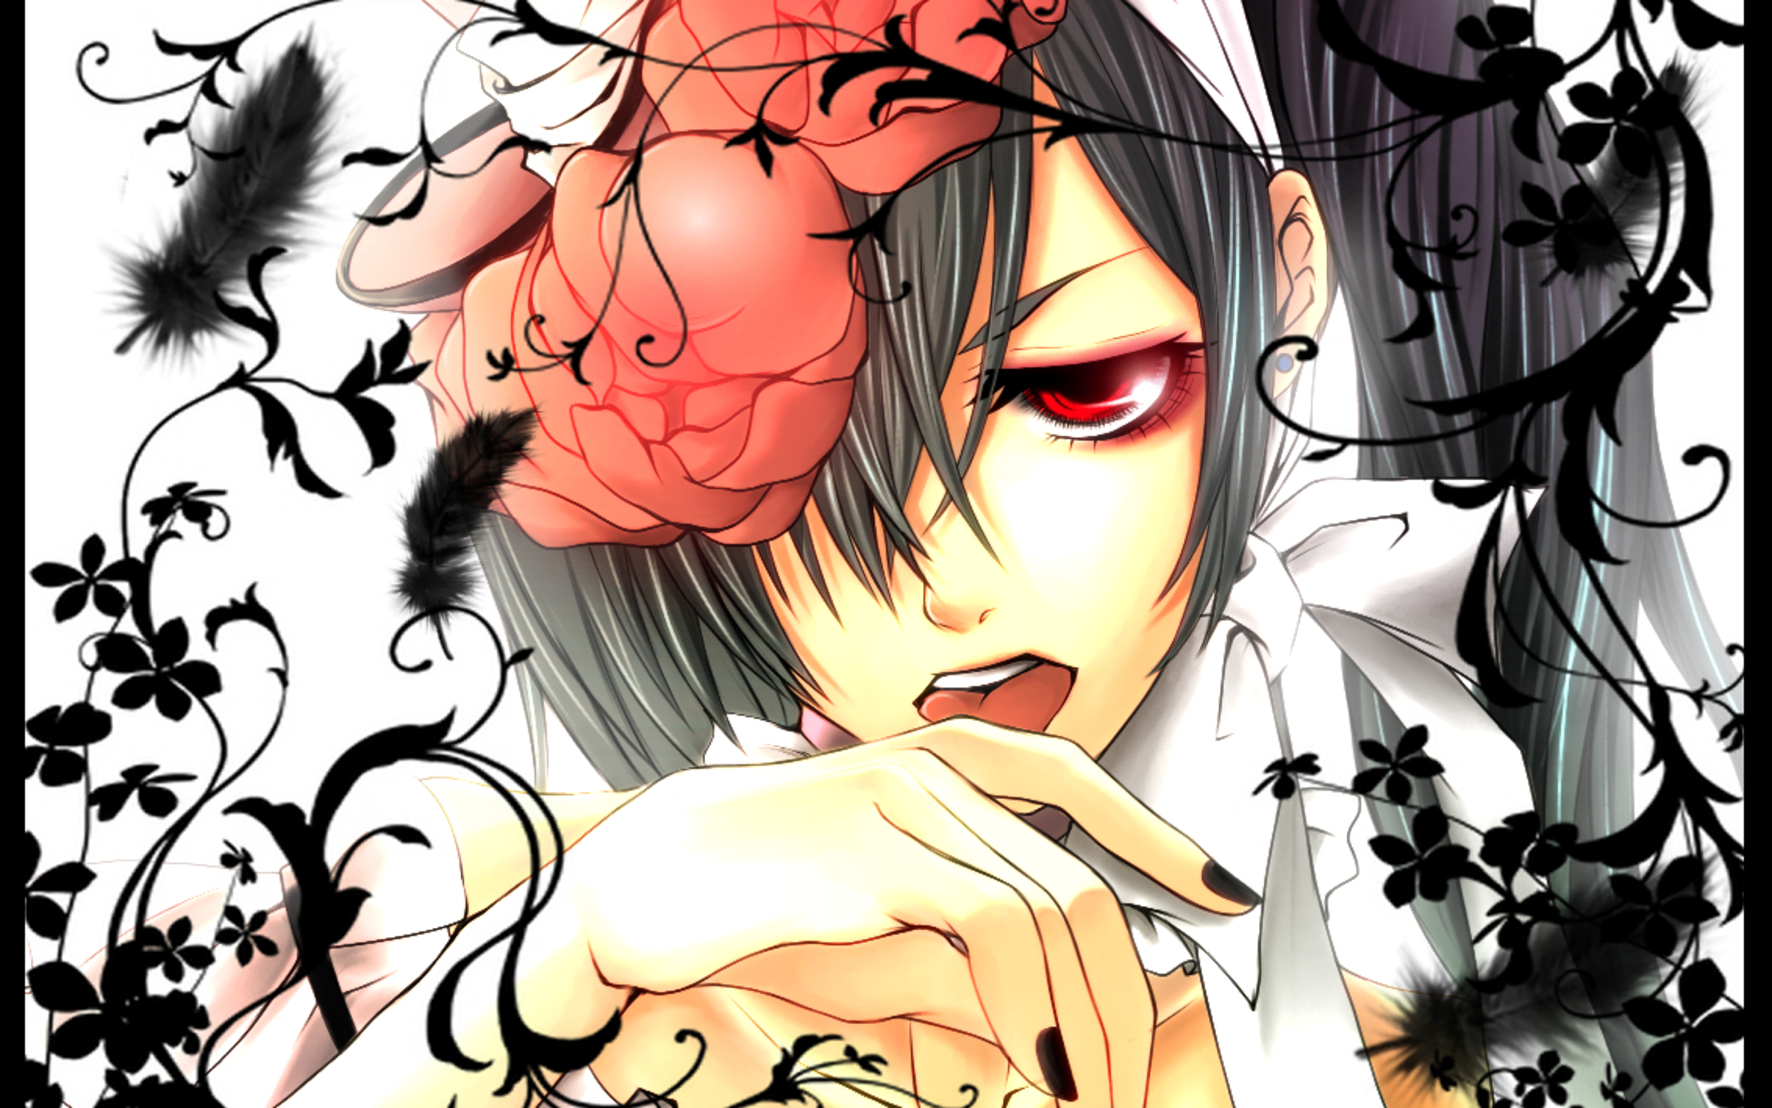 Anime 1772x1108 anime Ciel Phantomhive Black Butler anime girls painted nails red eyes tongues tongue out women dark hair glowing eyes licking hands flowers plants